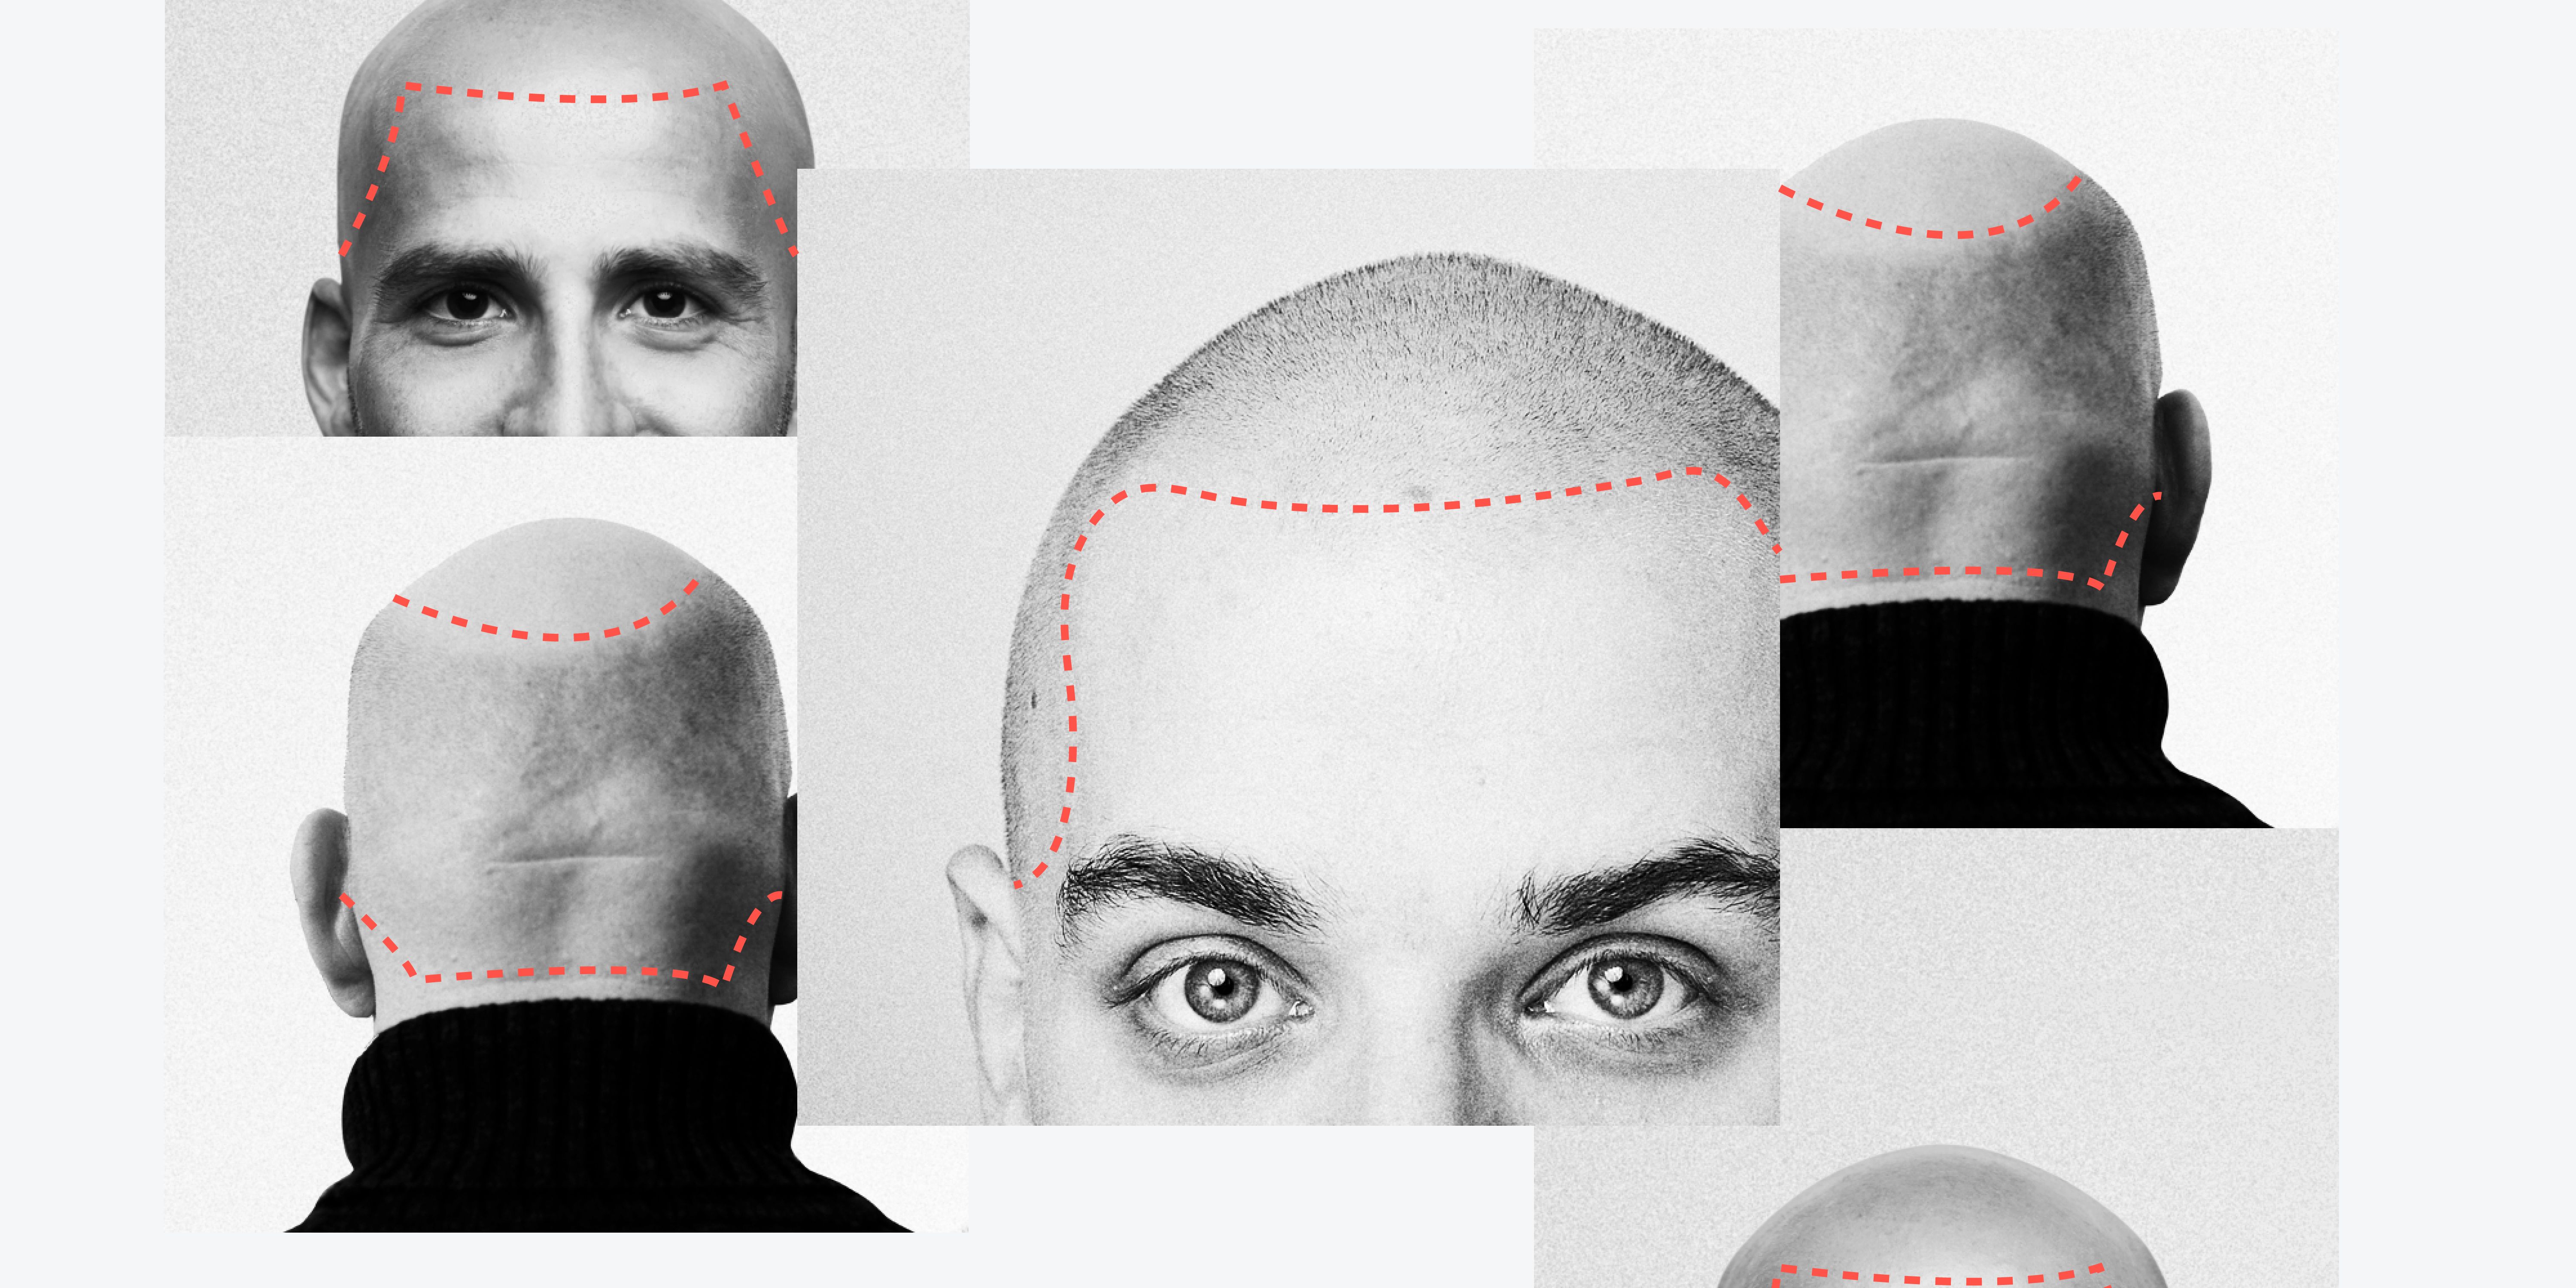 Hairline Tattoos Are A Thing, Here's What You Need To Know